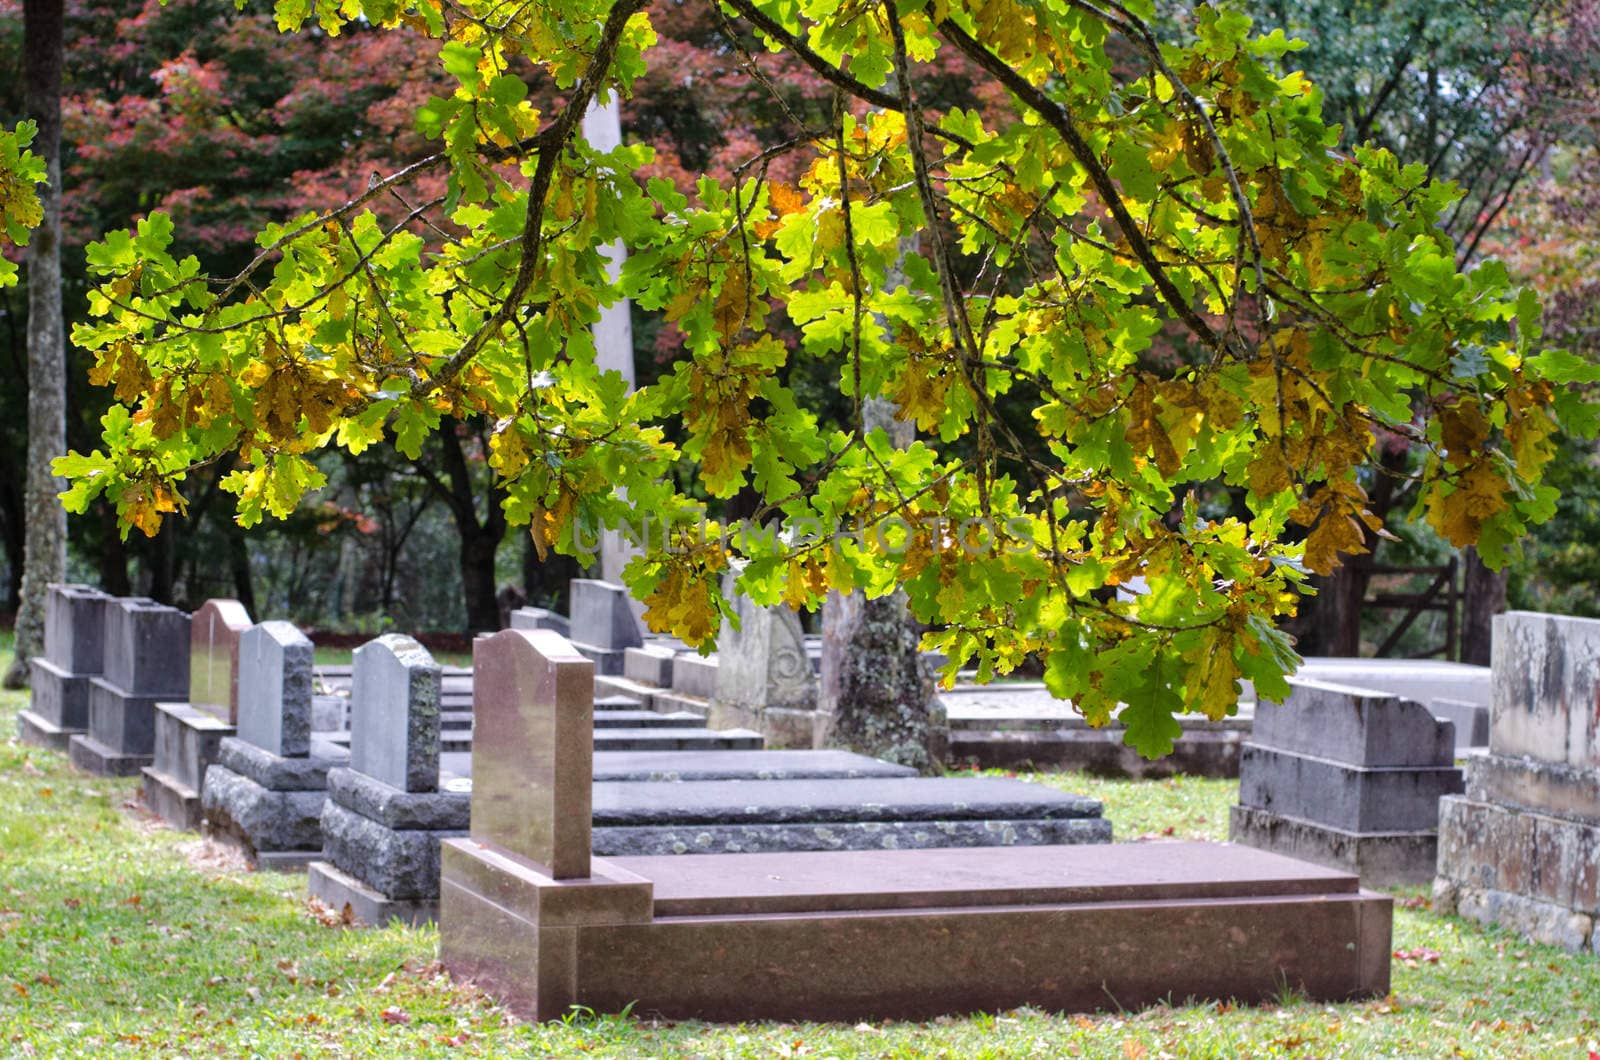 A peaceful cemetery / graveyard in autumn with tree branches in the foreground